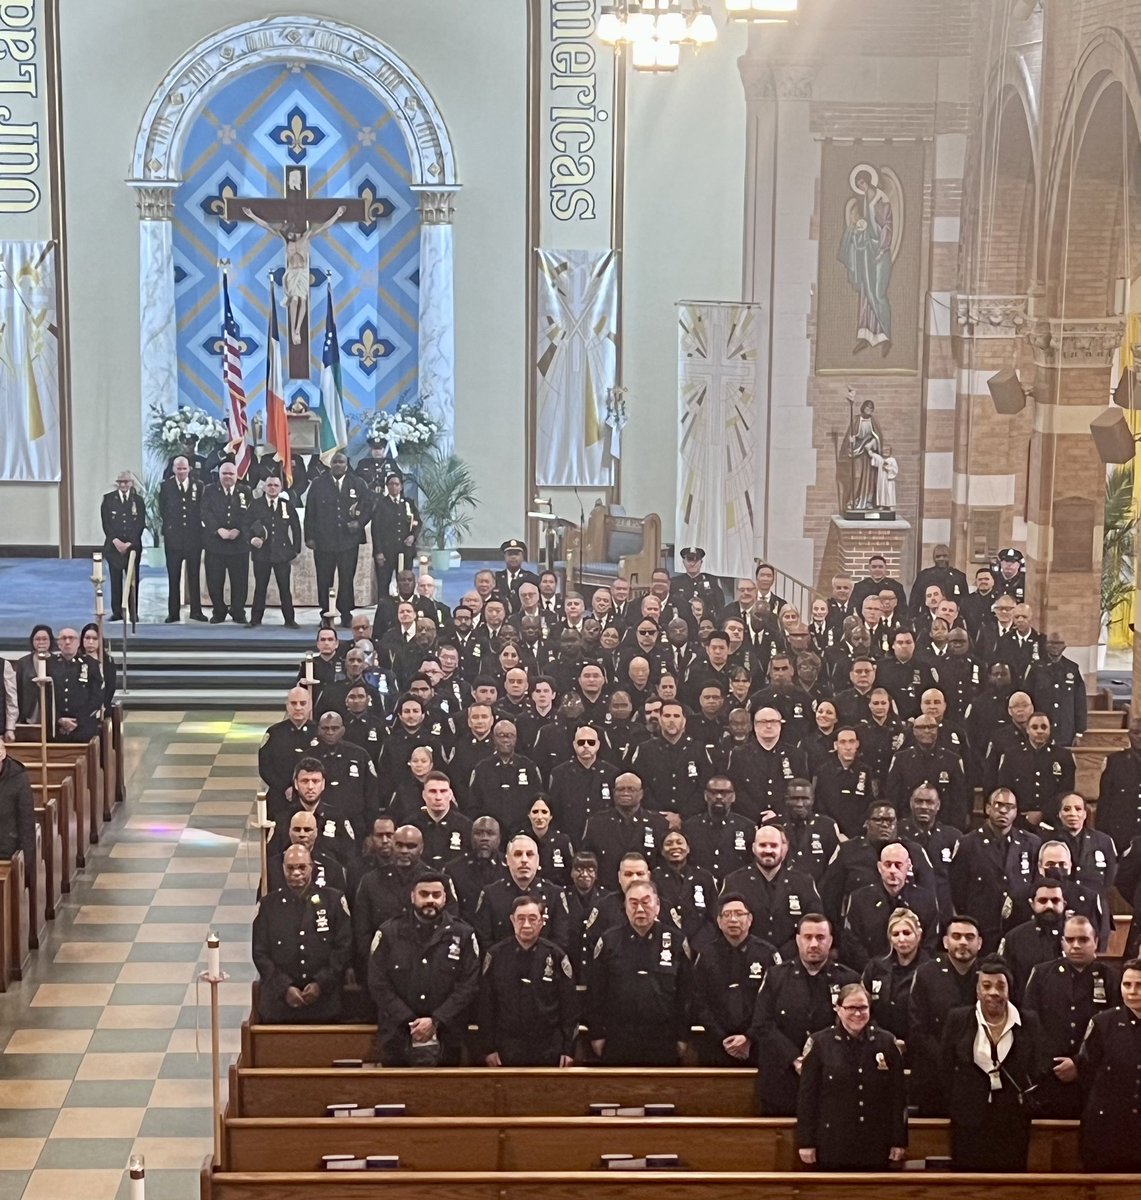 We gathered for the Annual @NYPDauxiliary Police Interfaith Memorial Ceremony which was held at Our Lady of Guadalupe Roman Catholic Church. We are always grateful for the extreme dedication from our Auxiliary Officers. Thank you for everything you do! #NeverForget @NYPDnews